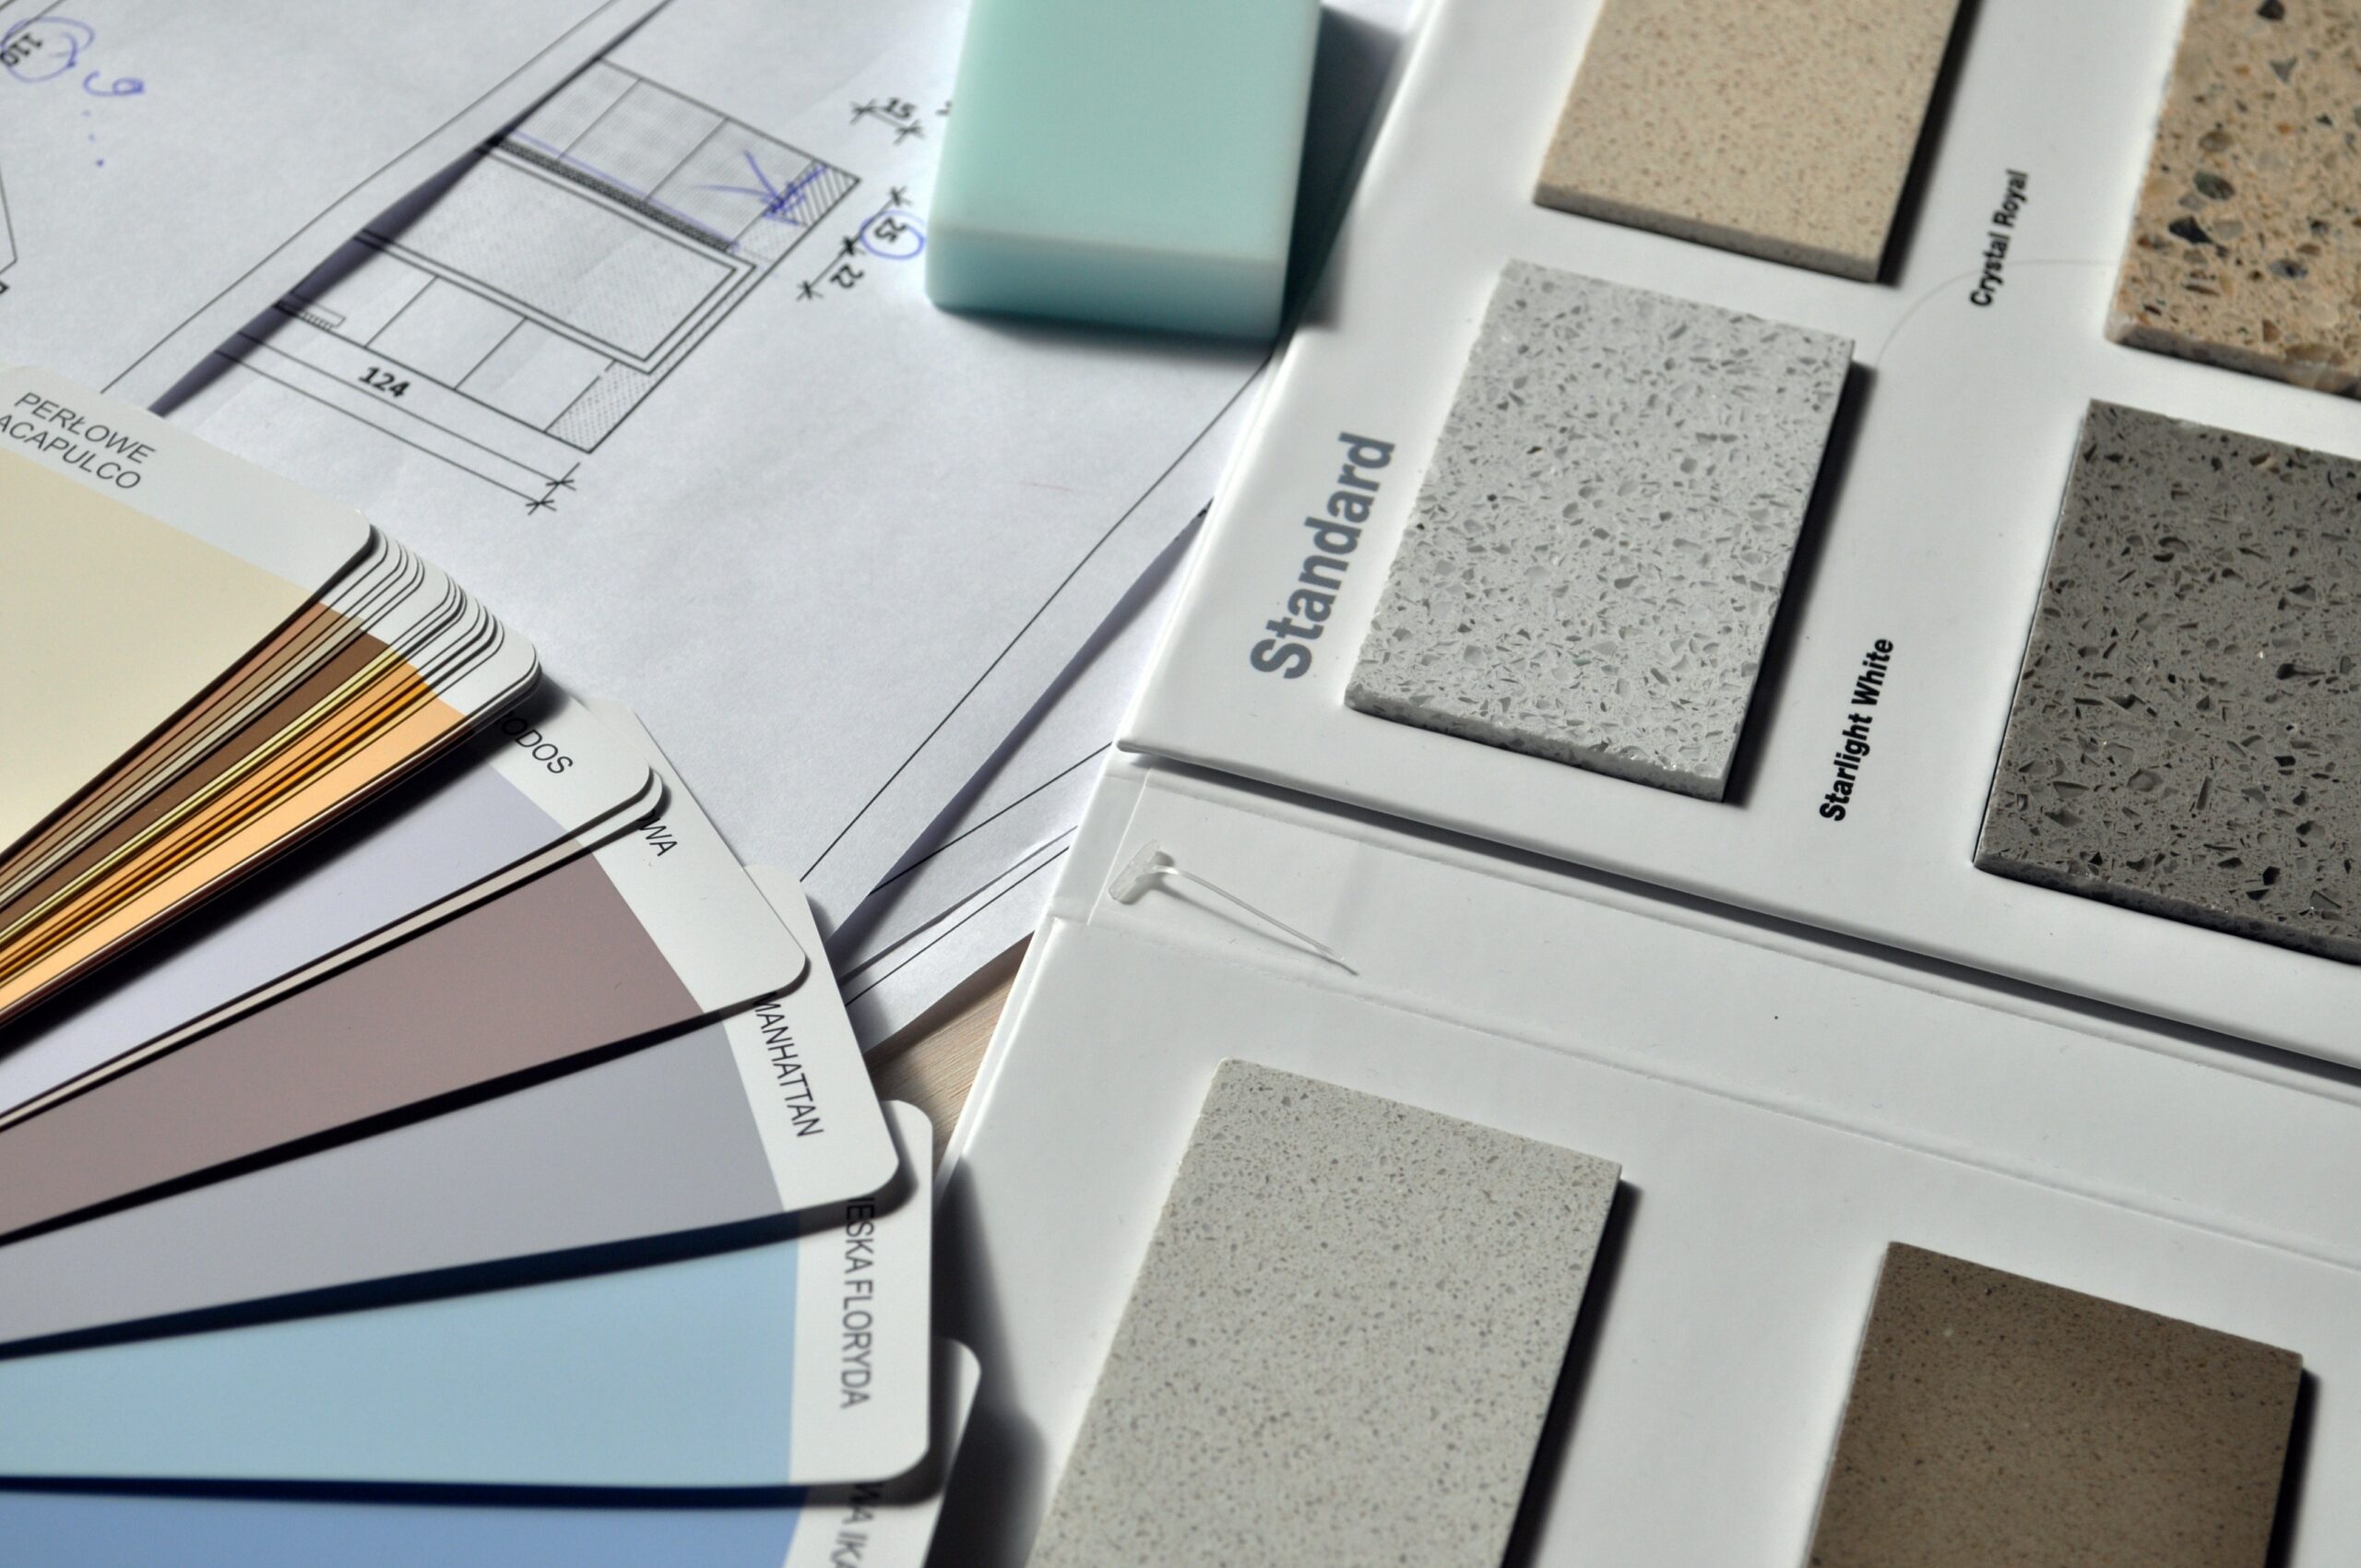 Paint and countertop samples